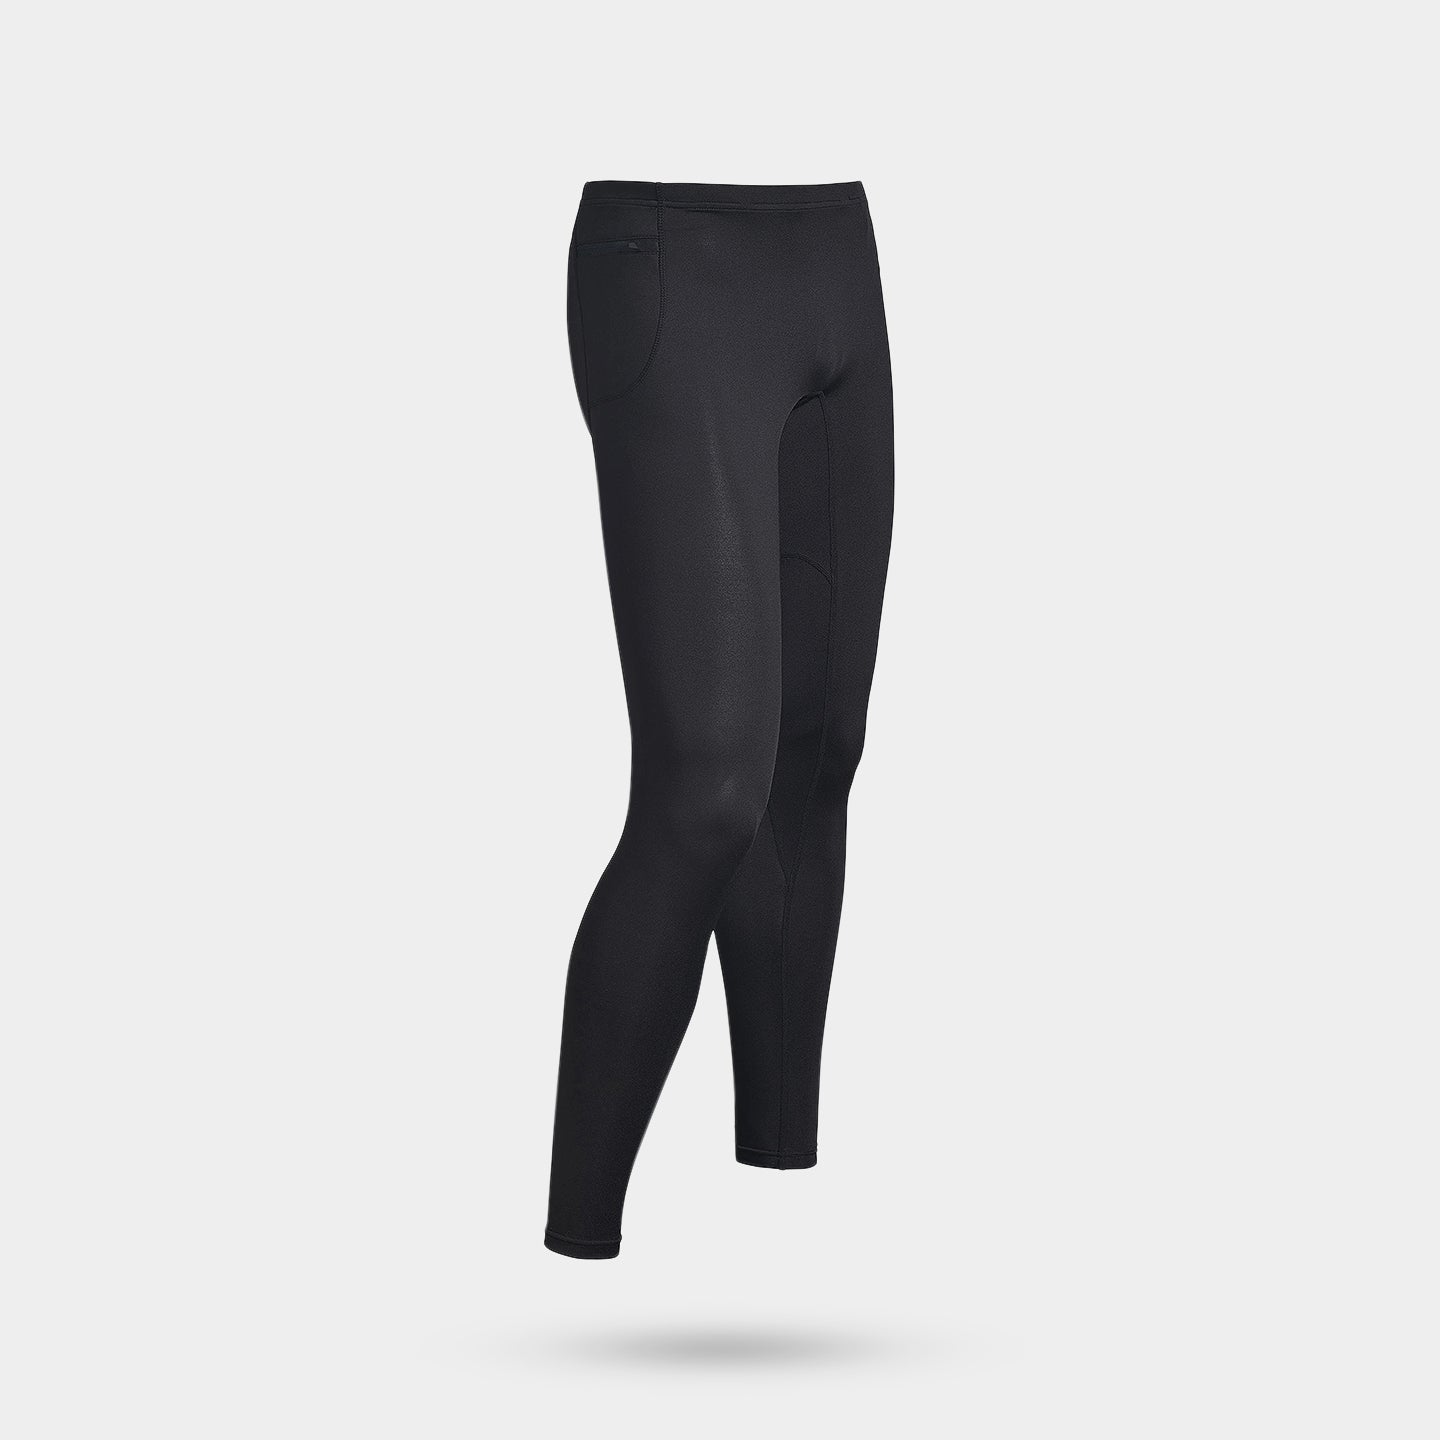 Expert Brand Men's Airstretch Performance Tights Compression Pants, L, Black A2